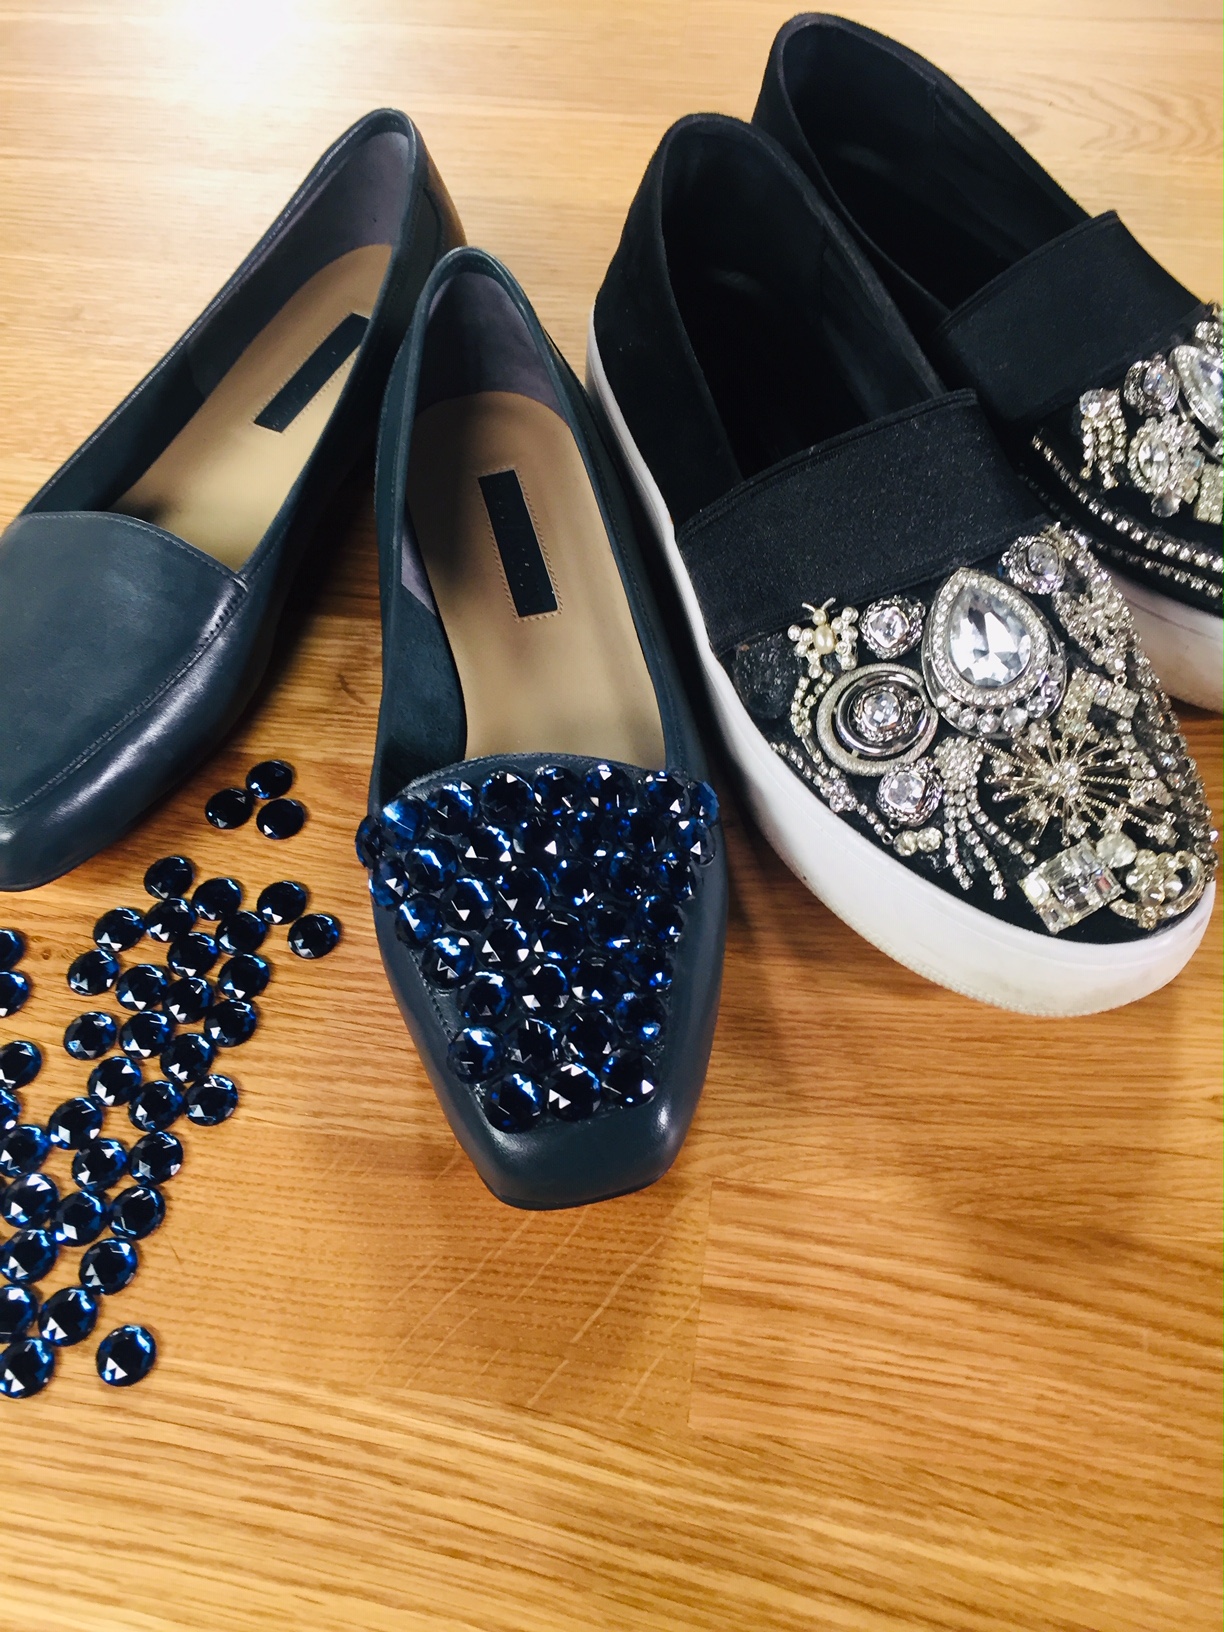 Bling up your shoes with costume jewelry